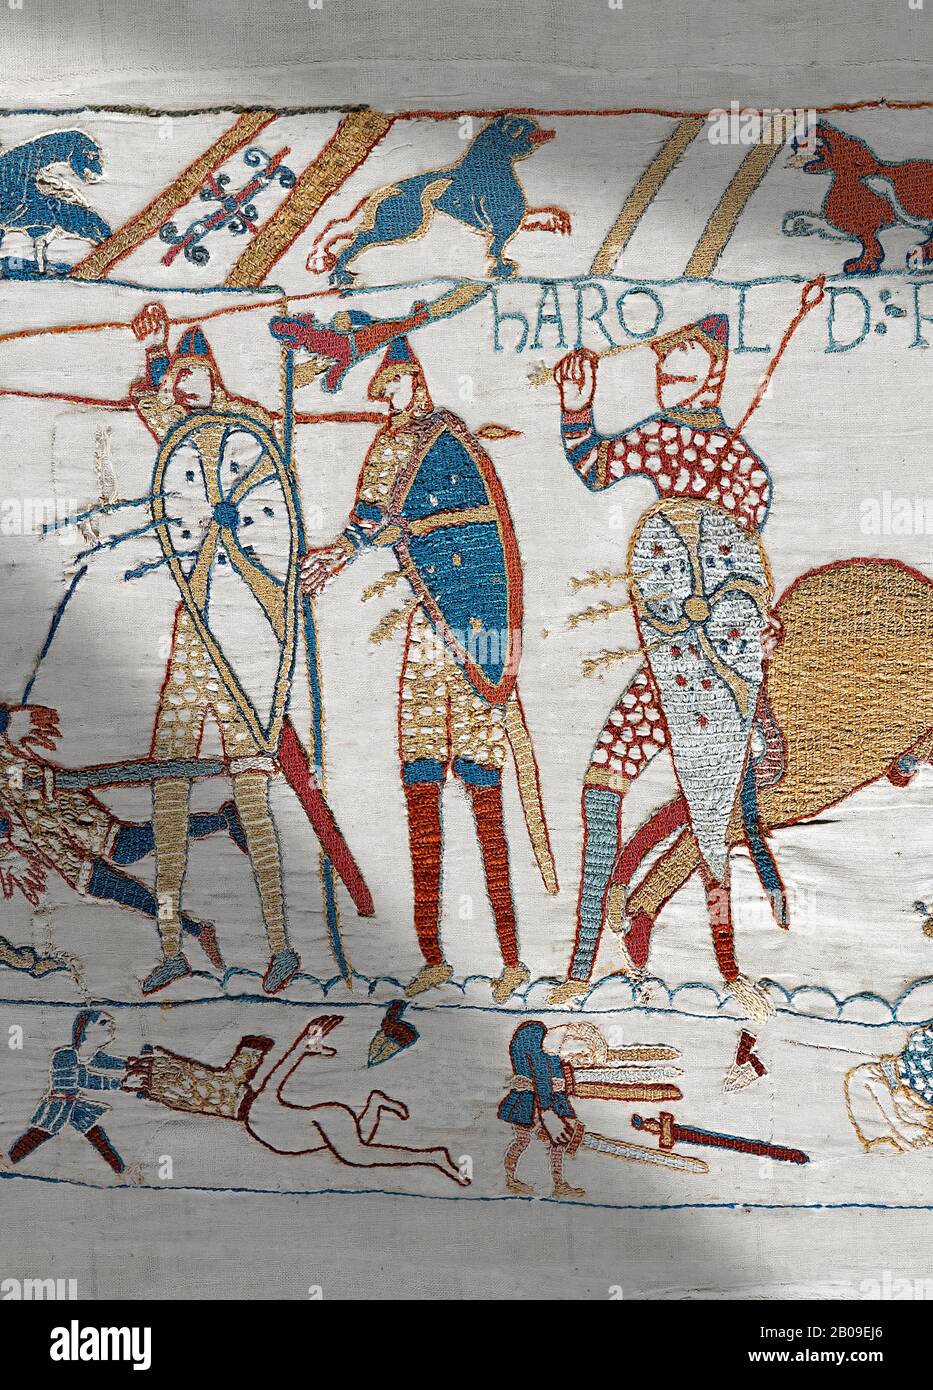 Bayeux Tapestry scene 57: King Harold is killed by an arrow in his eye as he looses the Battle of Hastings. Stock Photo